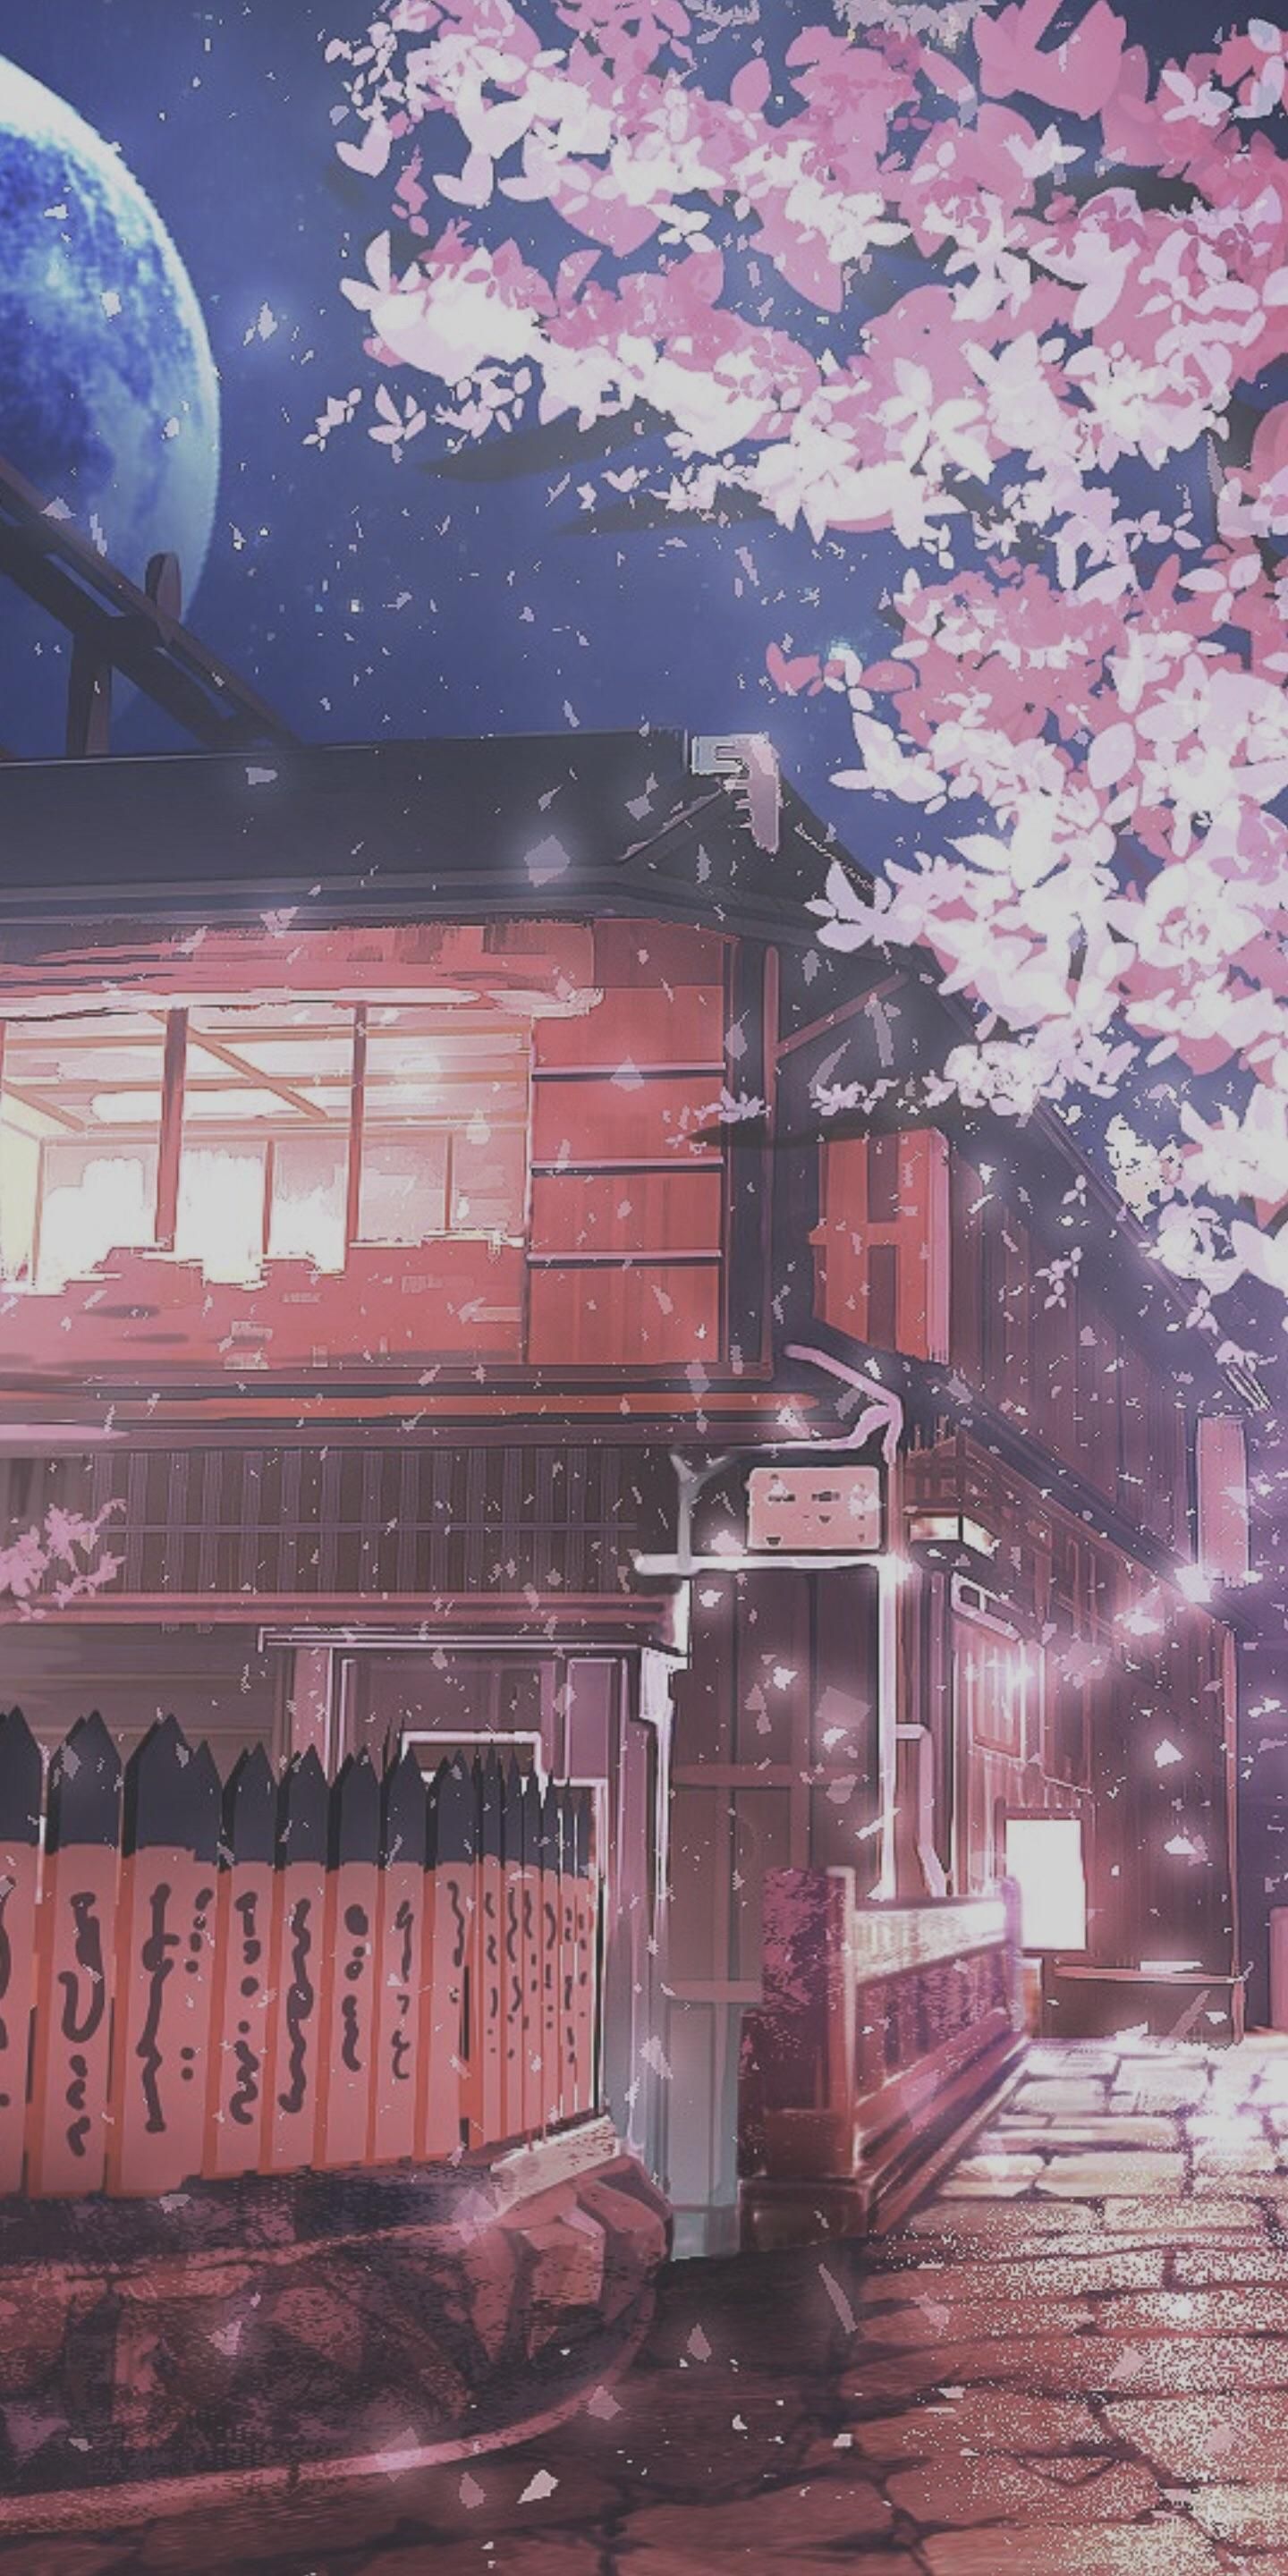 Aesthetic anime houses and cherry blossoms wallpaper - Anime landscape, scenery